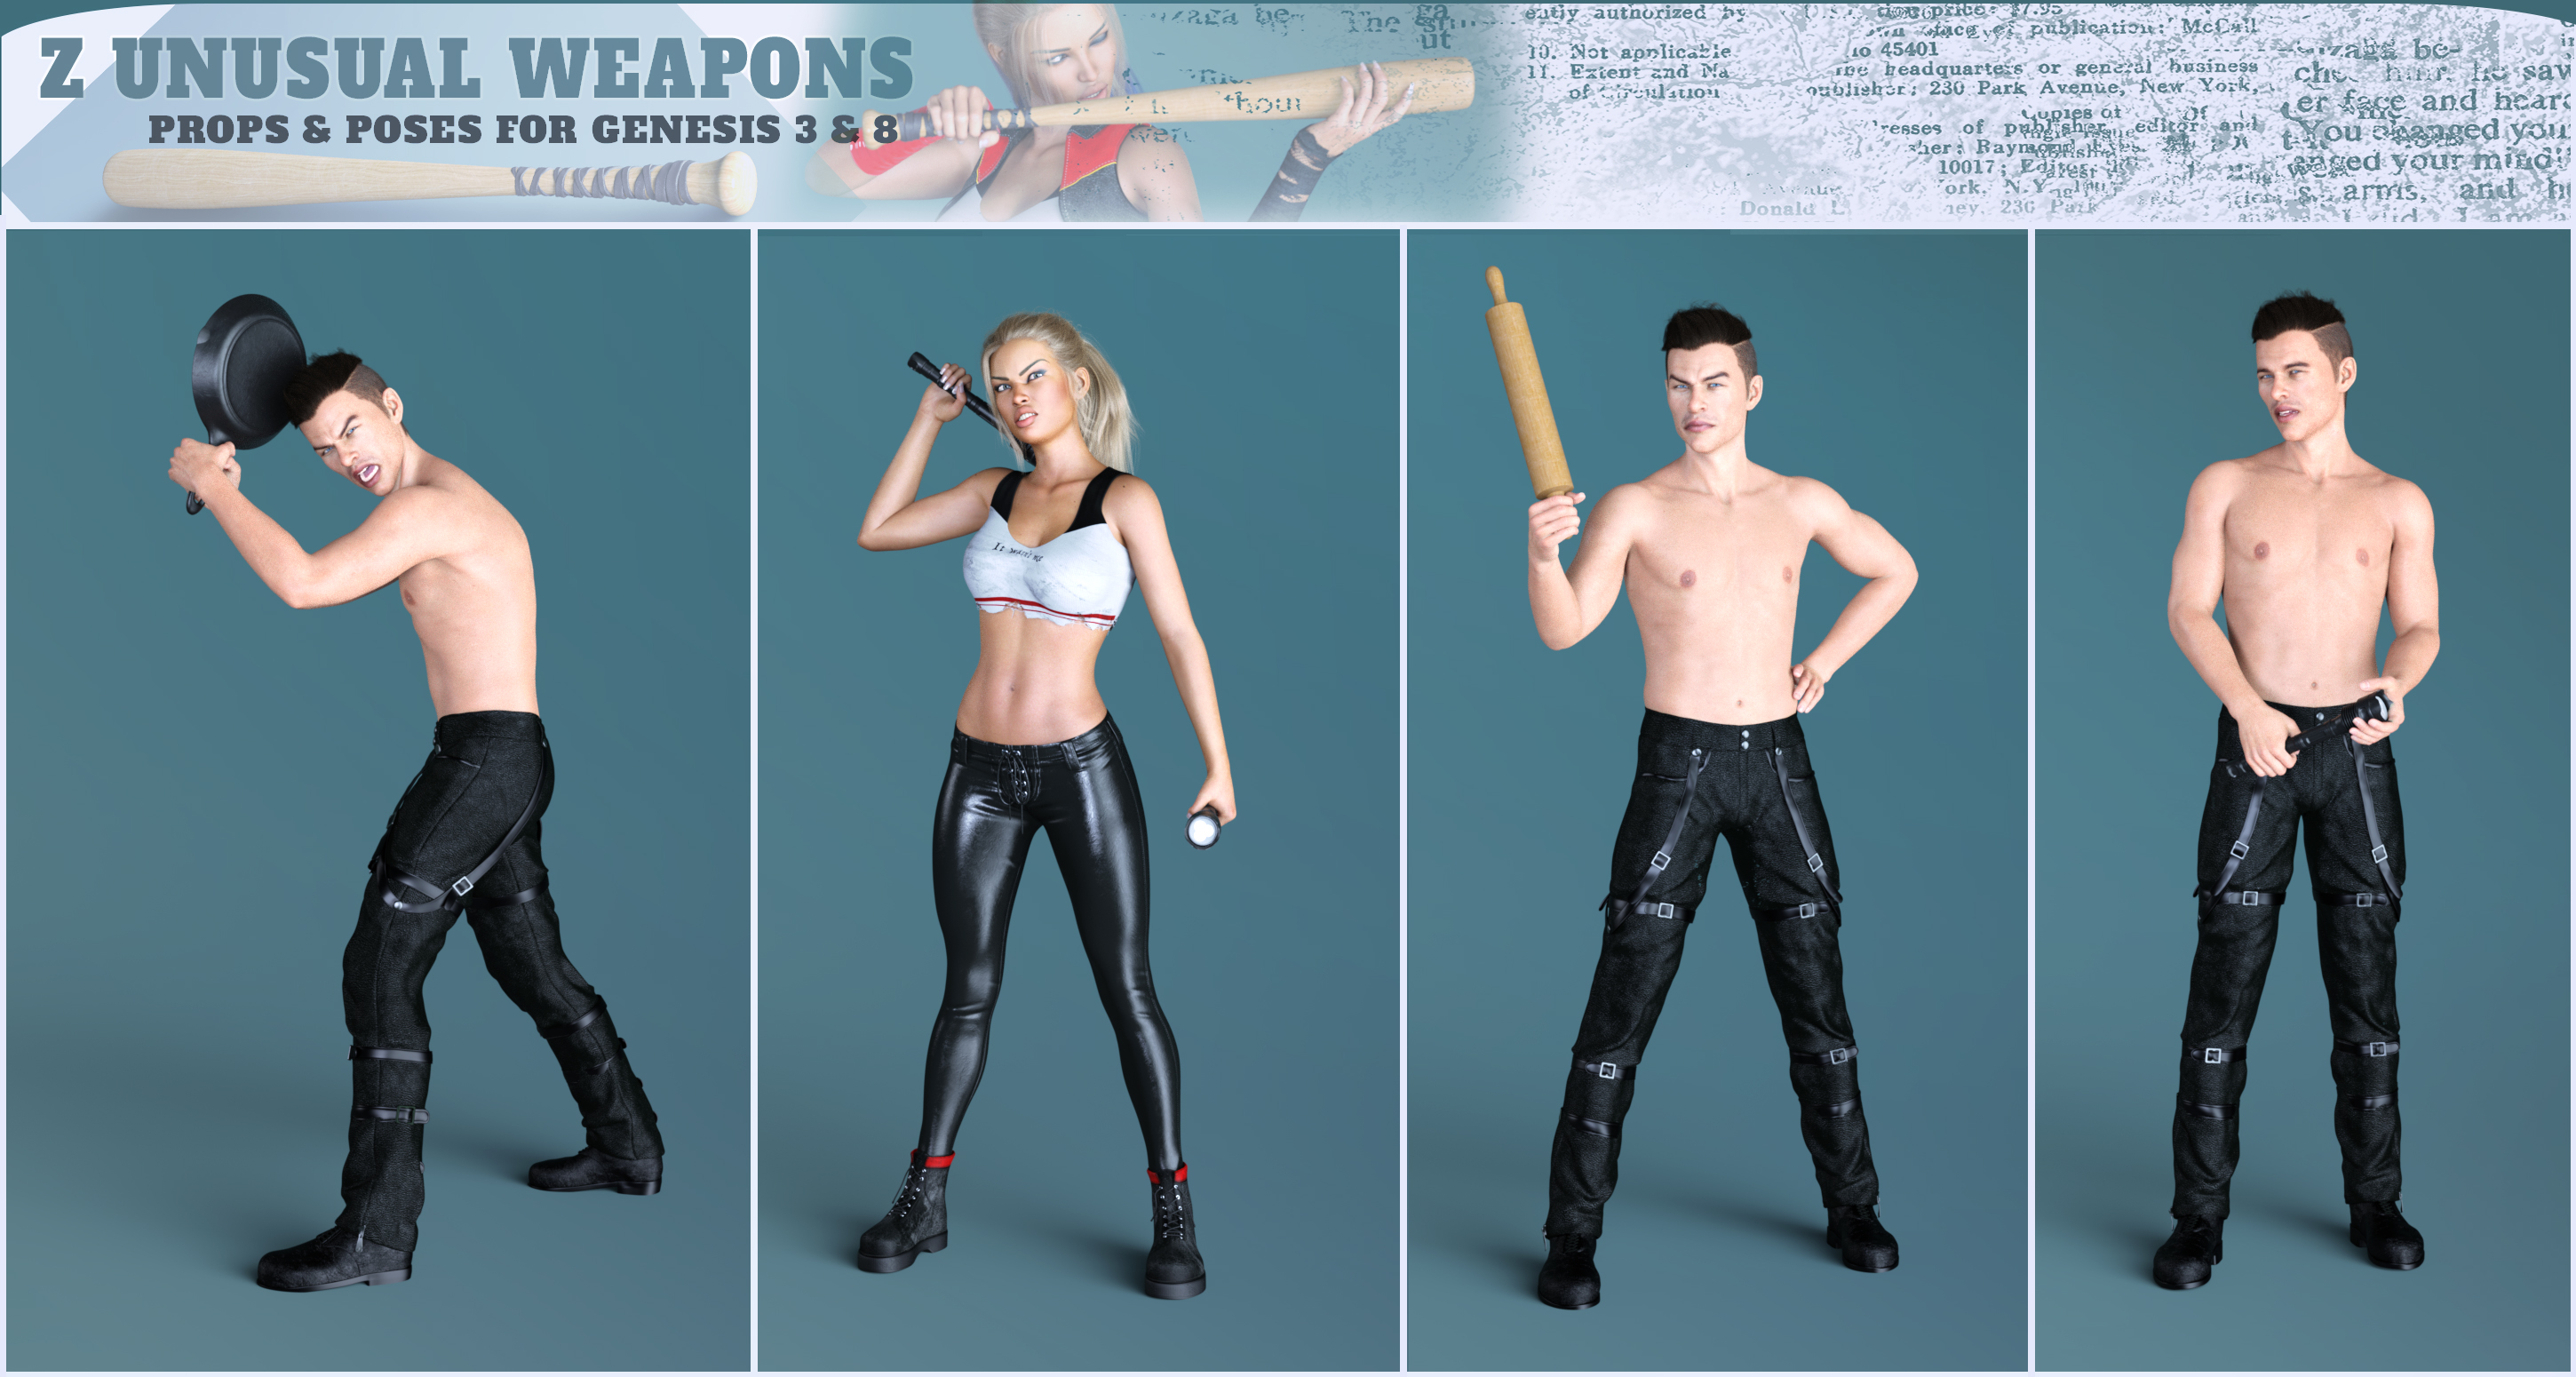 Z Unusual Weapons and Poses with Partials for Genesis 3 and 8 by: Zeddicuss, 3D Models by Daz 3D